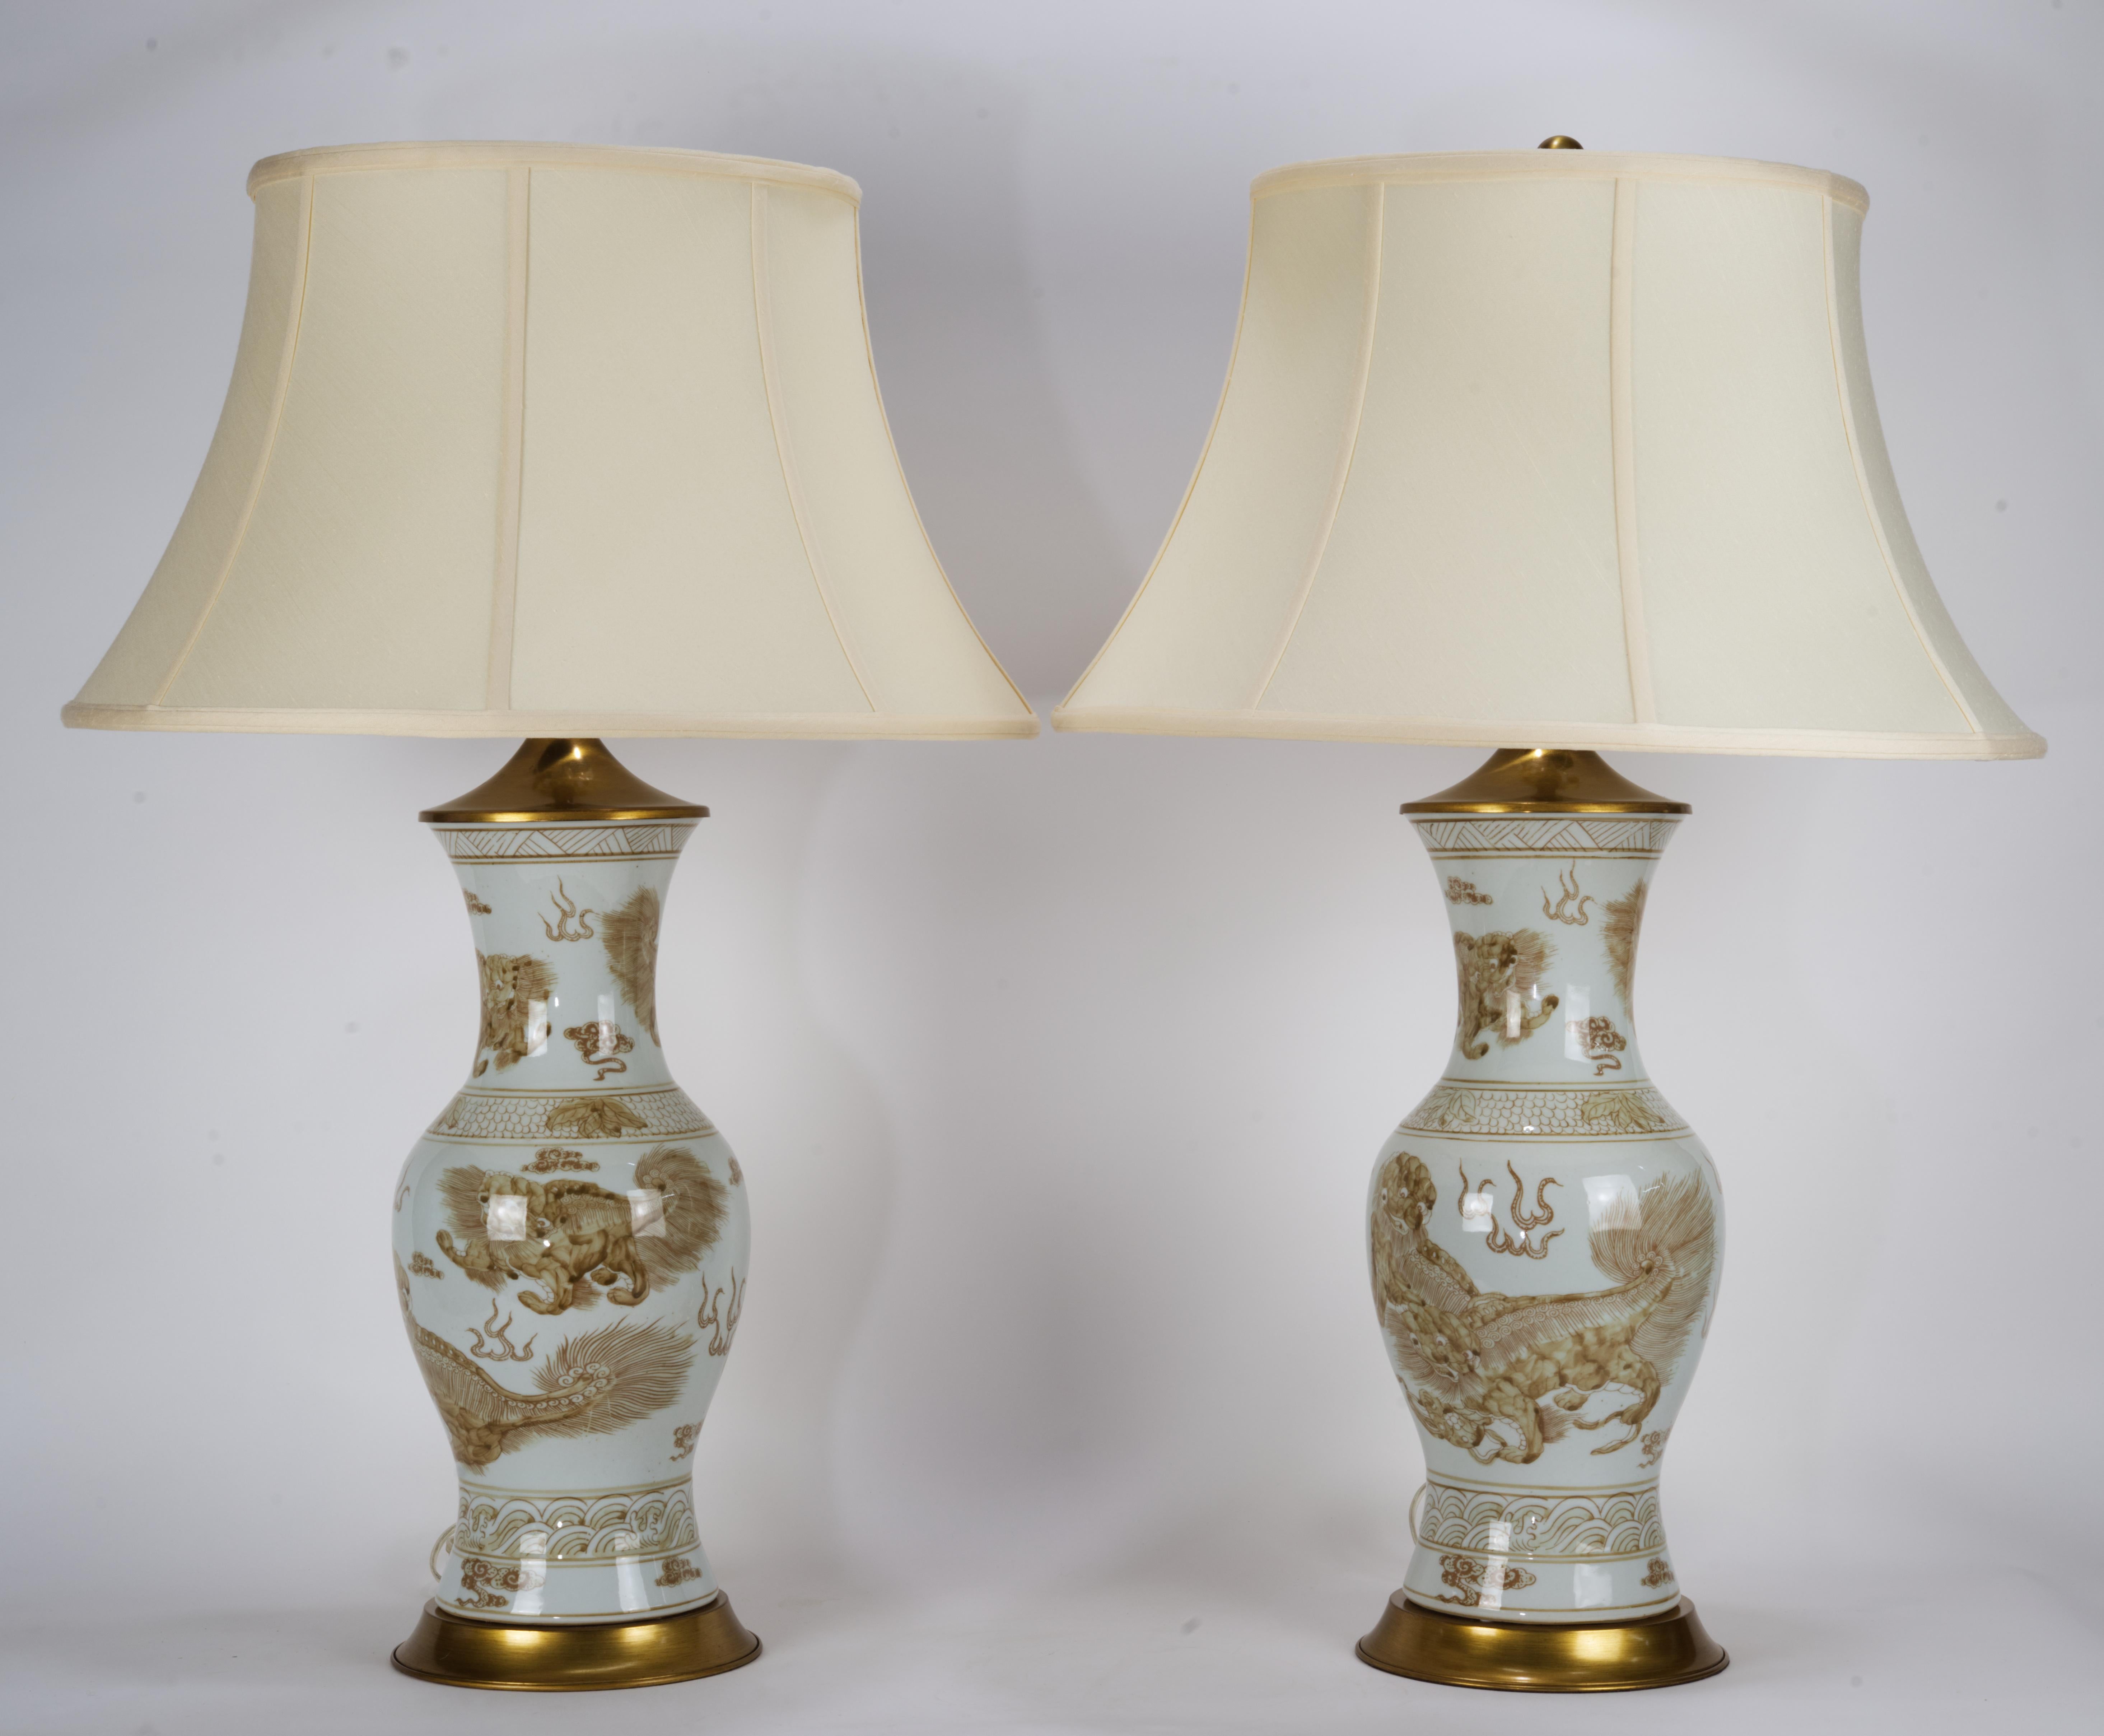  Large chinoiserie style white and brass brown table lamps are mounted on round brass bases and topped with fine brass fittings and substantial round brass finials. Classic urn vase shaped bodies are decorated with traditional Chinese motifs and